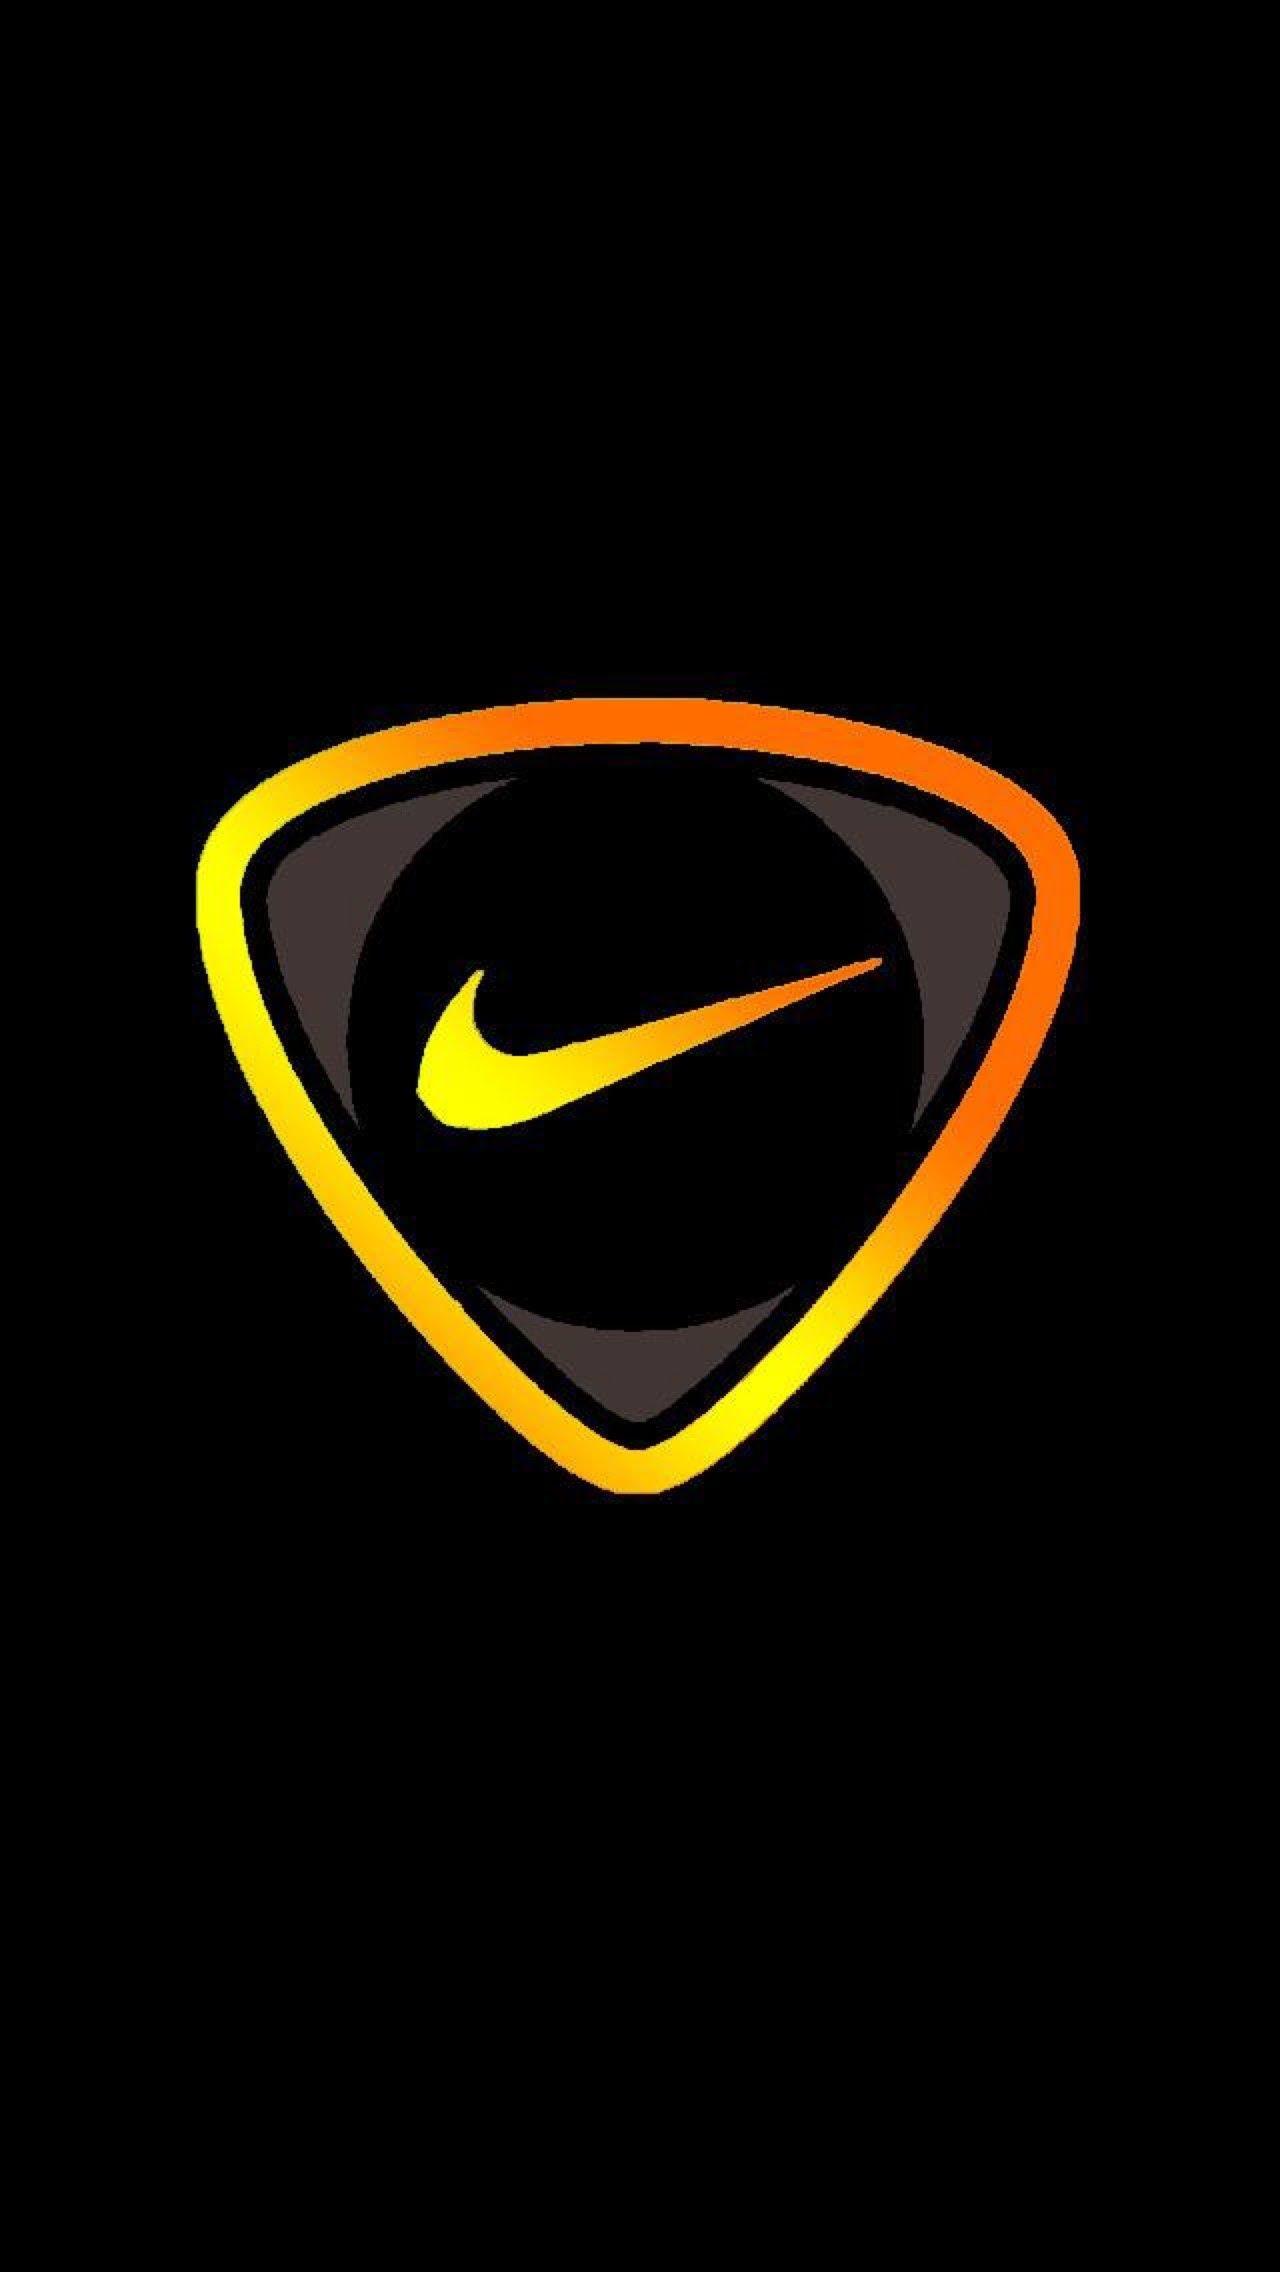 Nike Iphone Xr Wallpapers